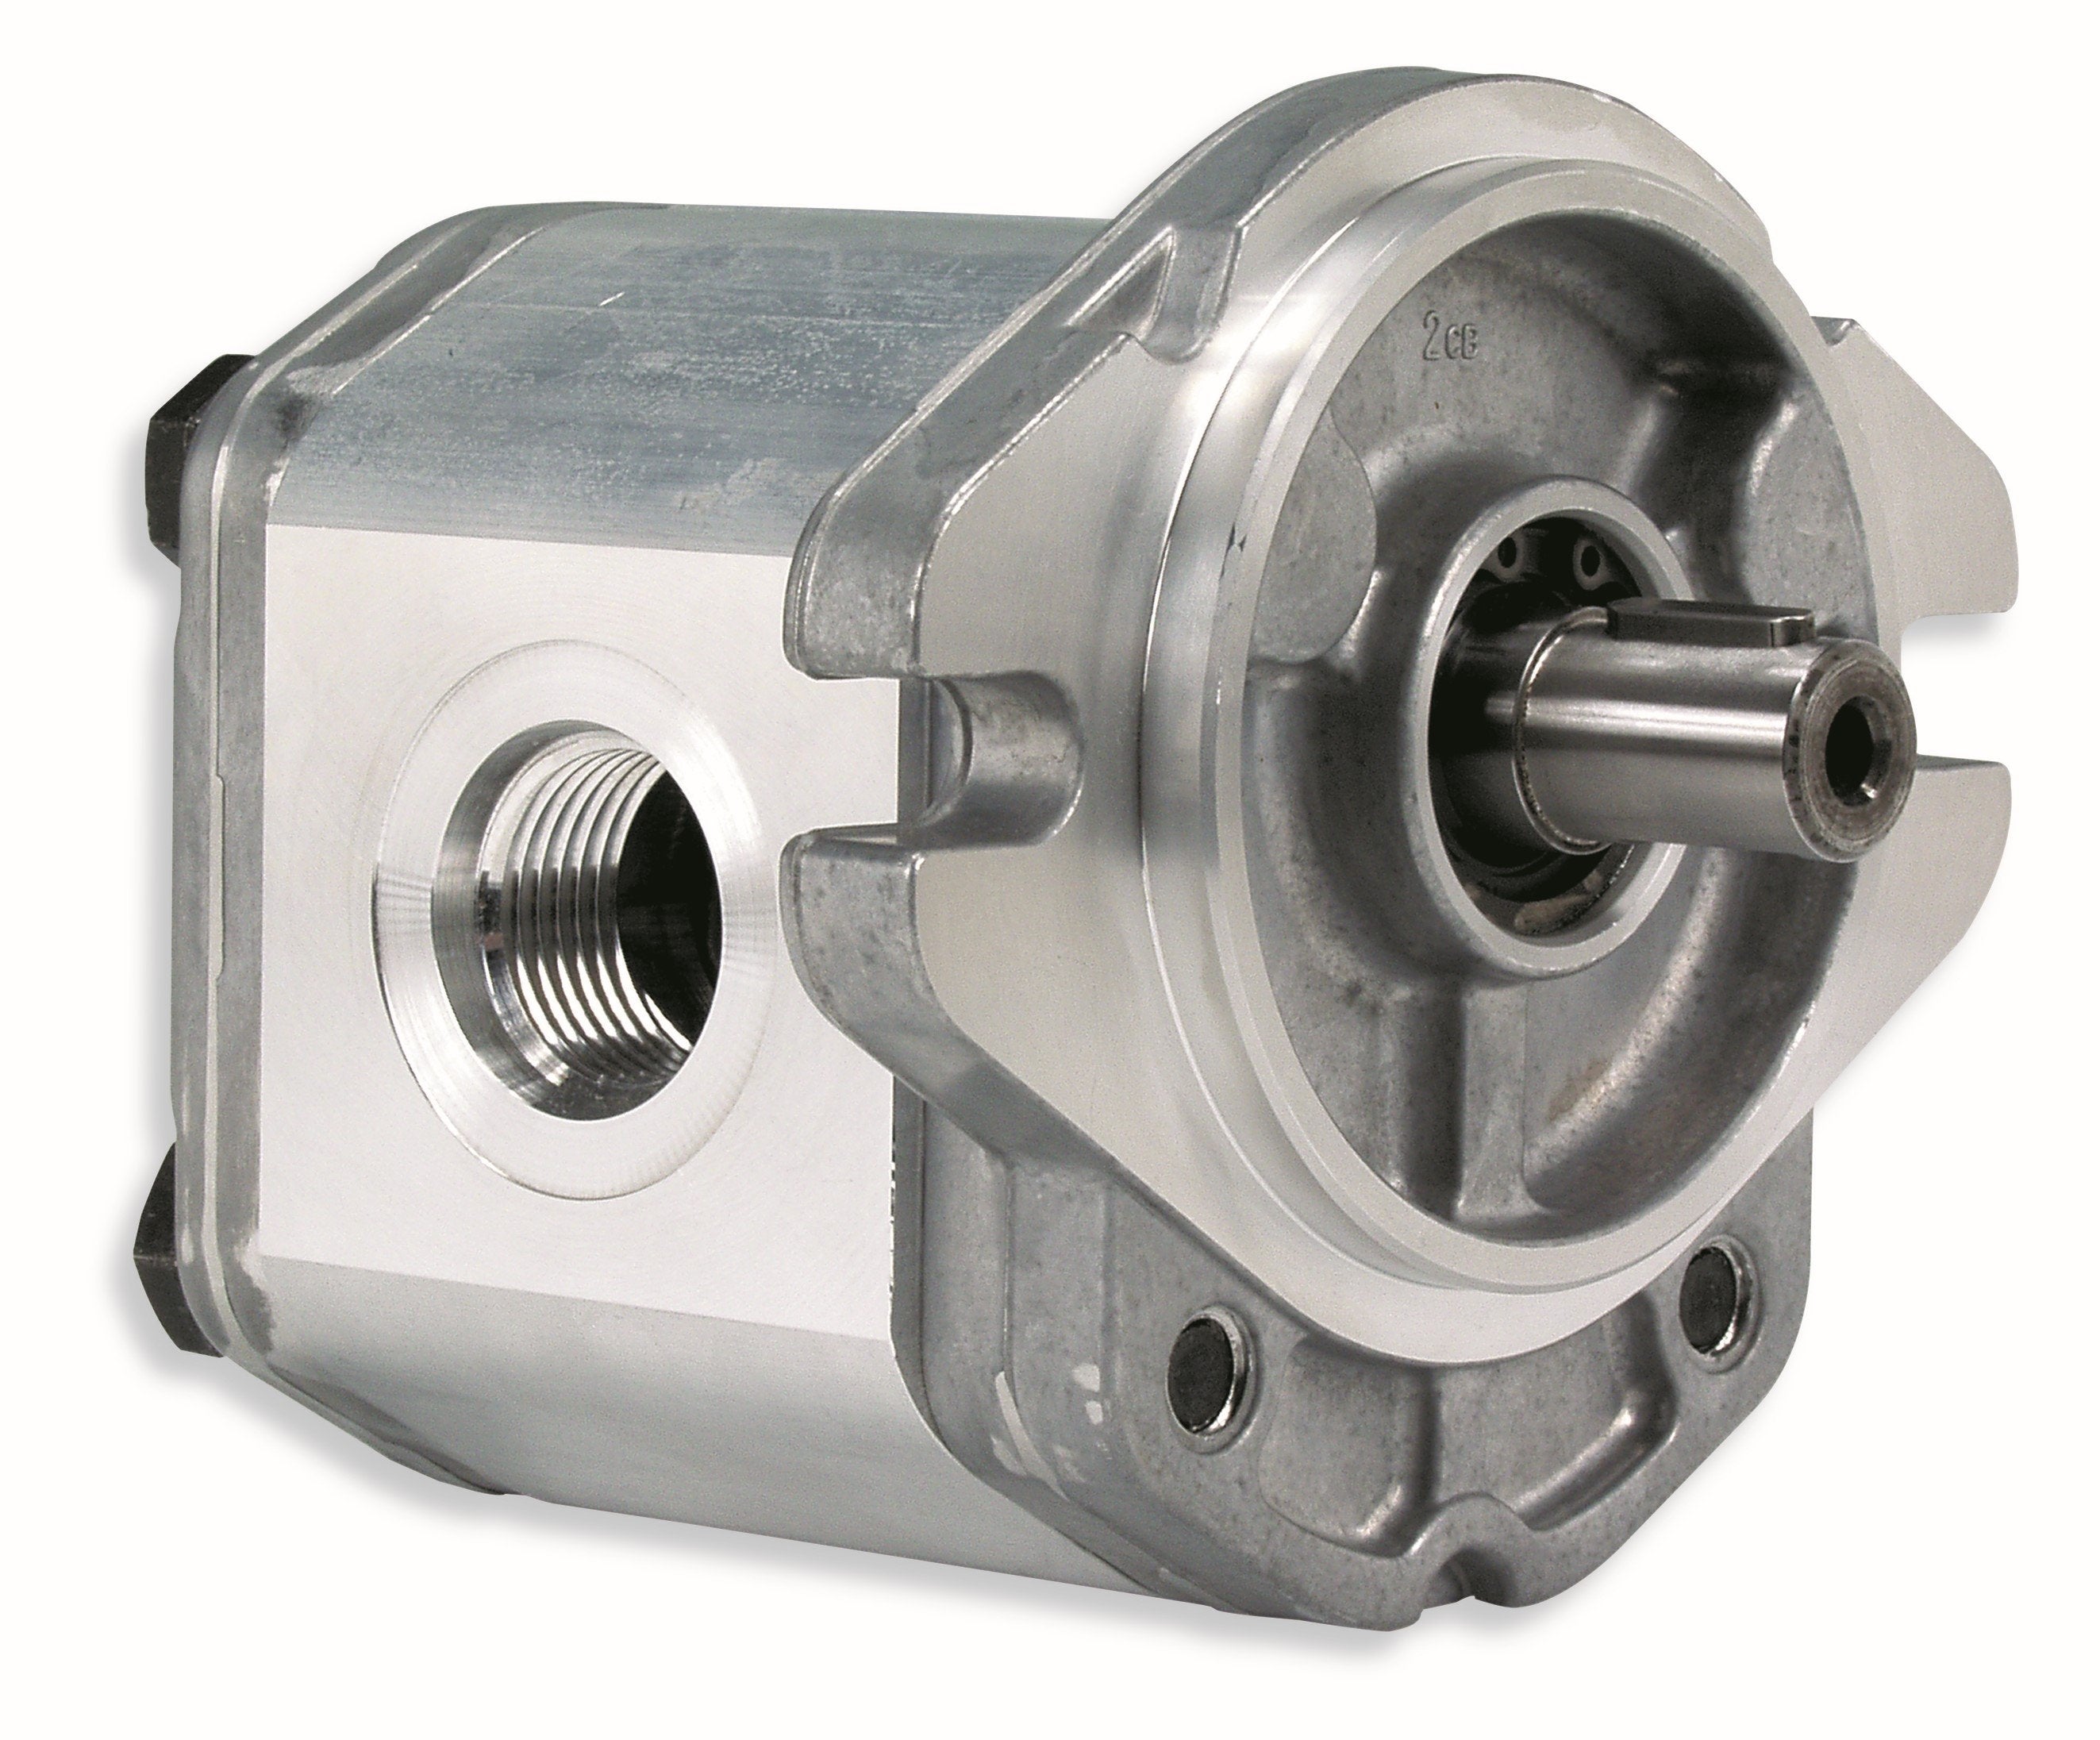 GHM2A-R-20-E2 : Marzocchi Gear Motor, Bidirectional, 14.1cc, 3770psi rated, 3200RPM, 0.75 (3/4") #12 SAE ports, 5/8" Bore x 5/32" Keyed Shaft